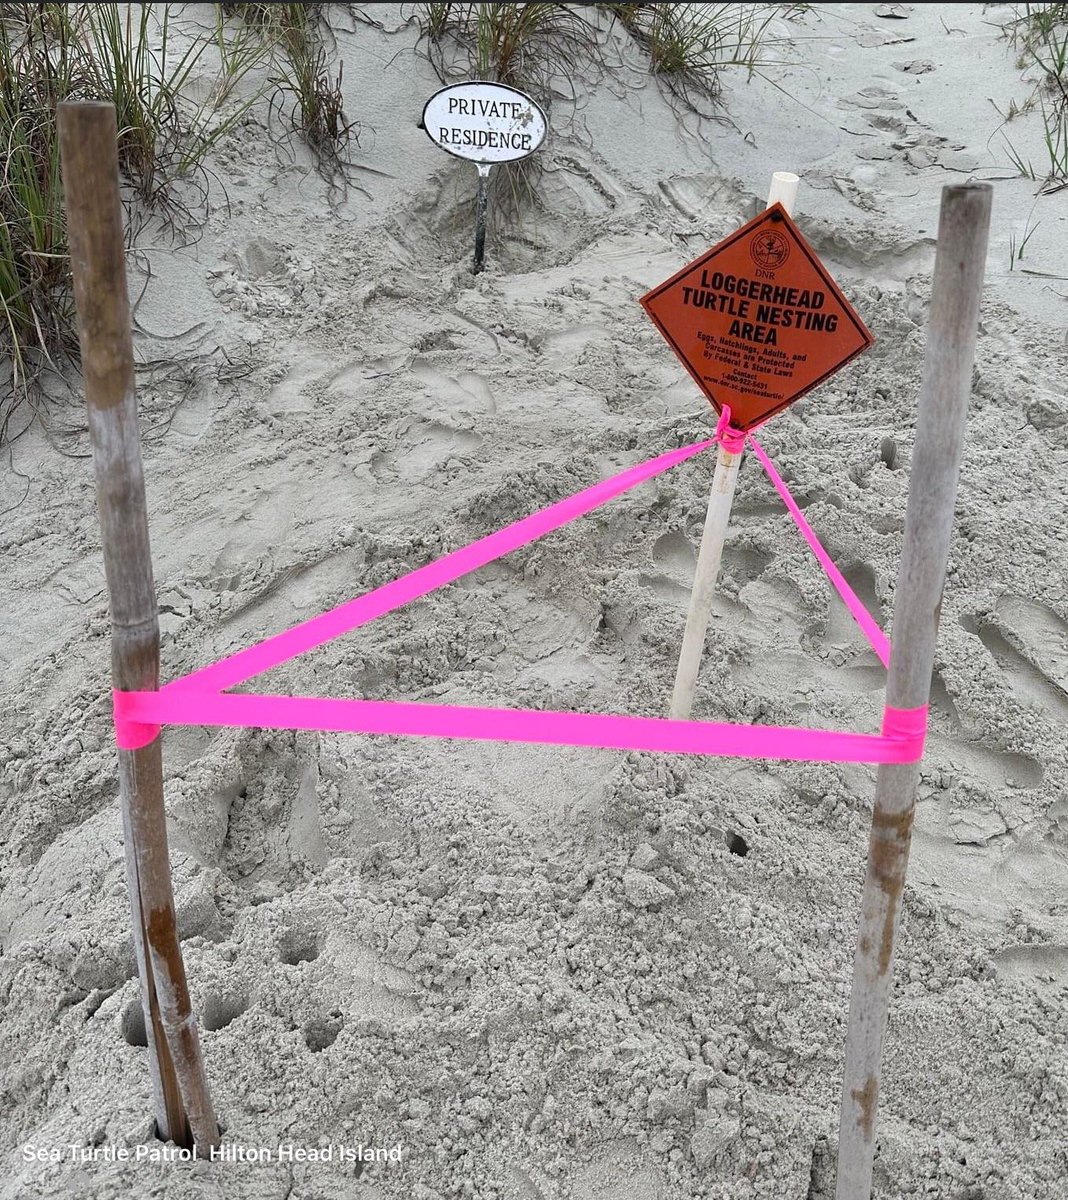 In news unrelated to golf or Trump, it’s sea turtle nesting season on the island! 🐢💚 Hoping for over 400 nests again like last year! #pickupyourtrash #fillyourholes #SundayFunday